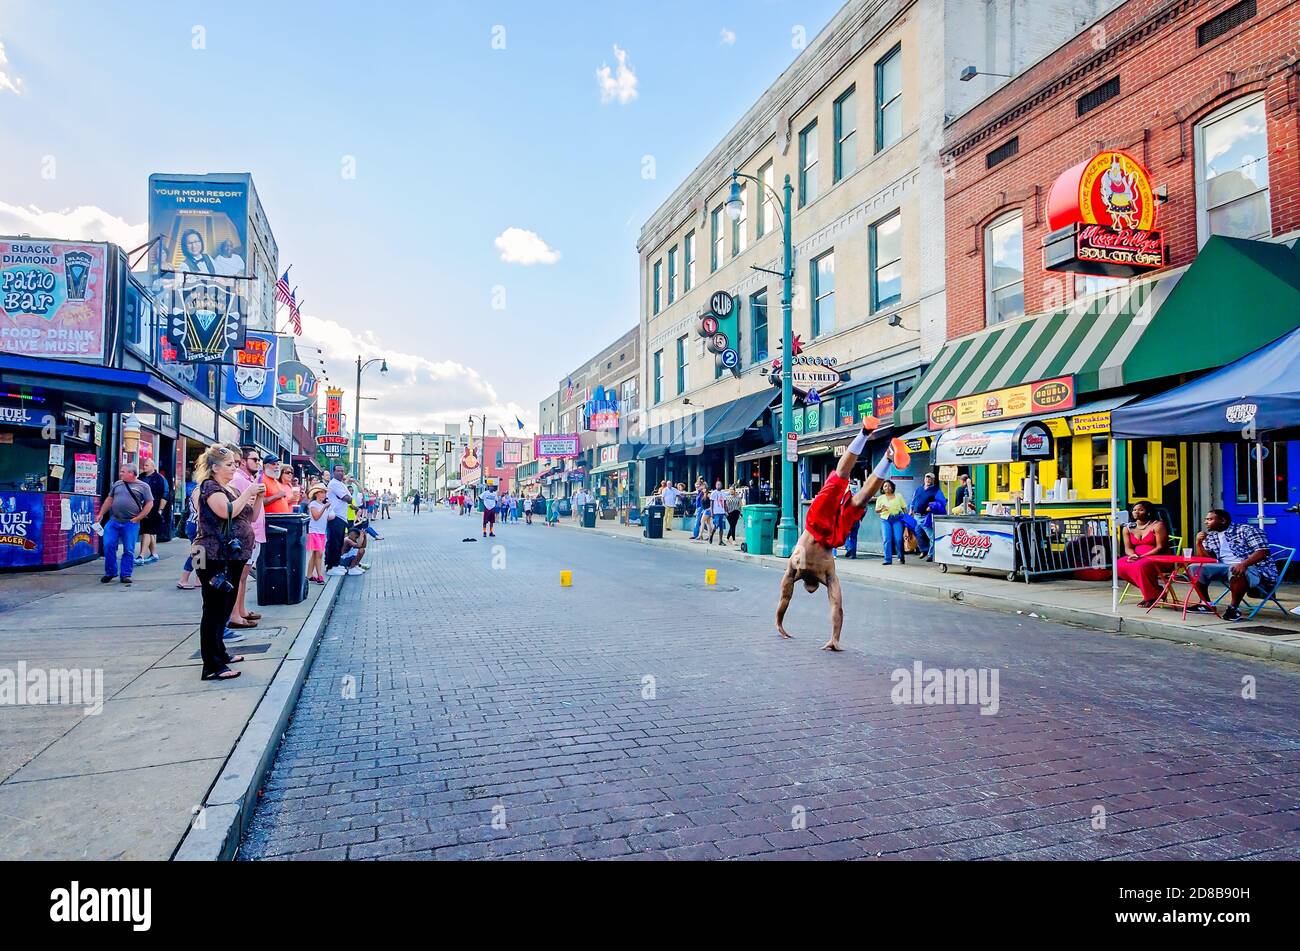 Members of the Beale Street Flippers entertain tourists on Beale Street, Sept. 12, 2015, in Memphis, Tennessee. Stock Photo